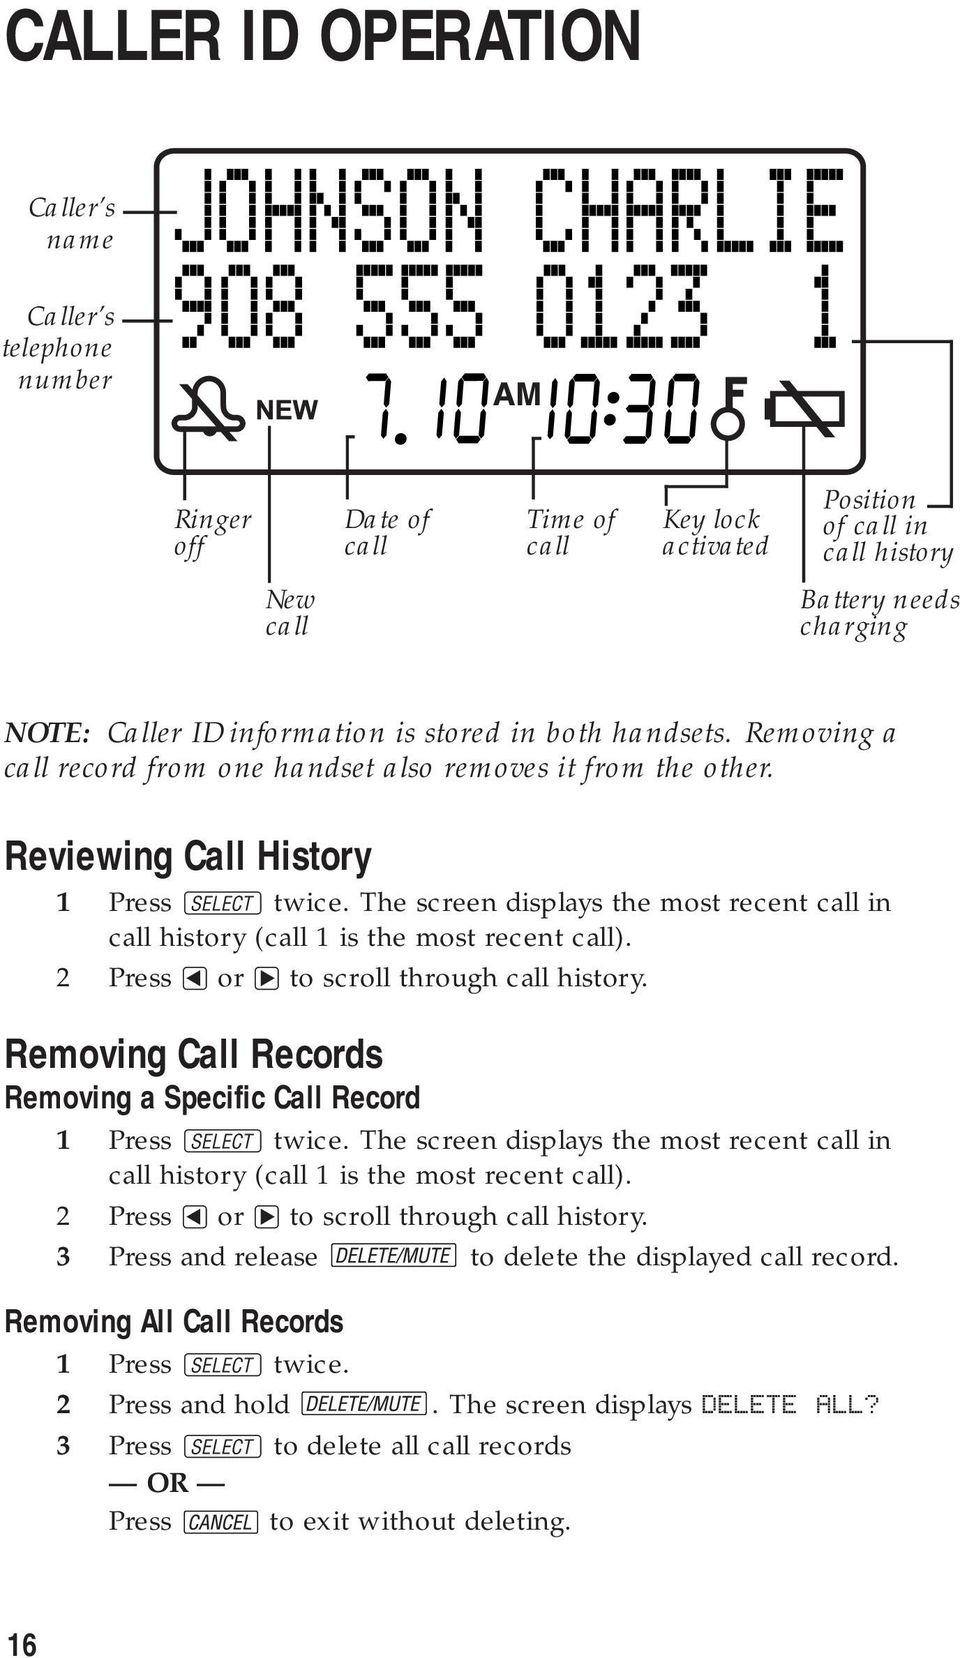 The screen displays the most recent call in call history (call 1 is the most recent call). 2 Press < or > to scroll through call history.